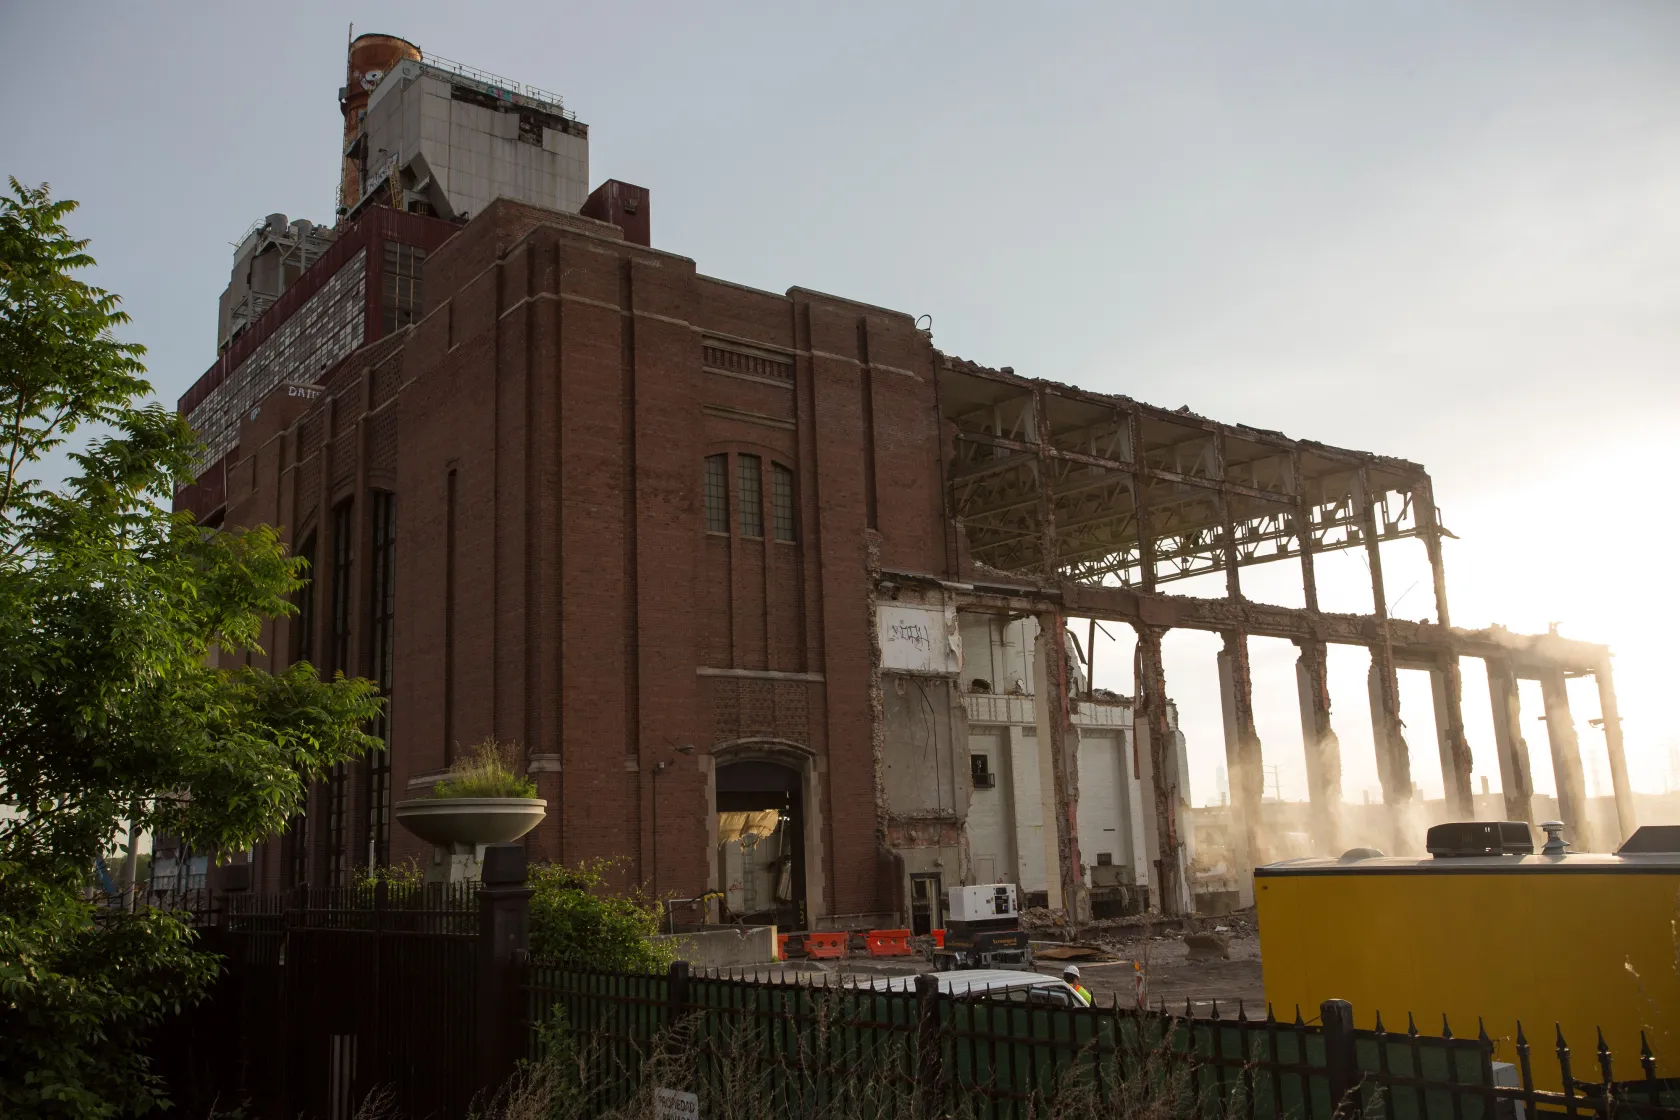 Converted Crawford power plant is the kind of investment Latino communities need